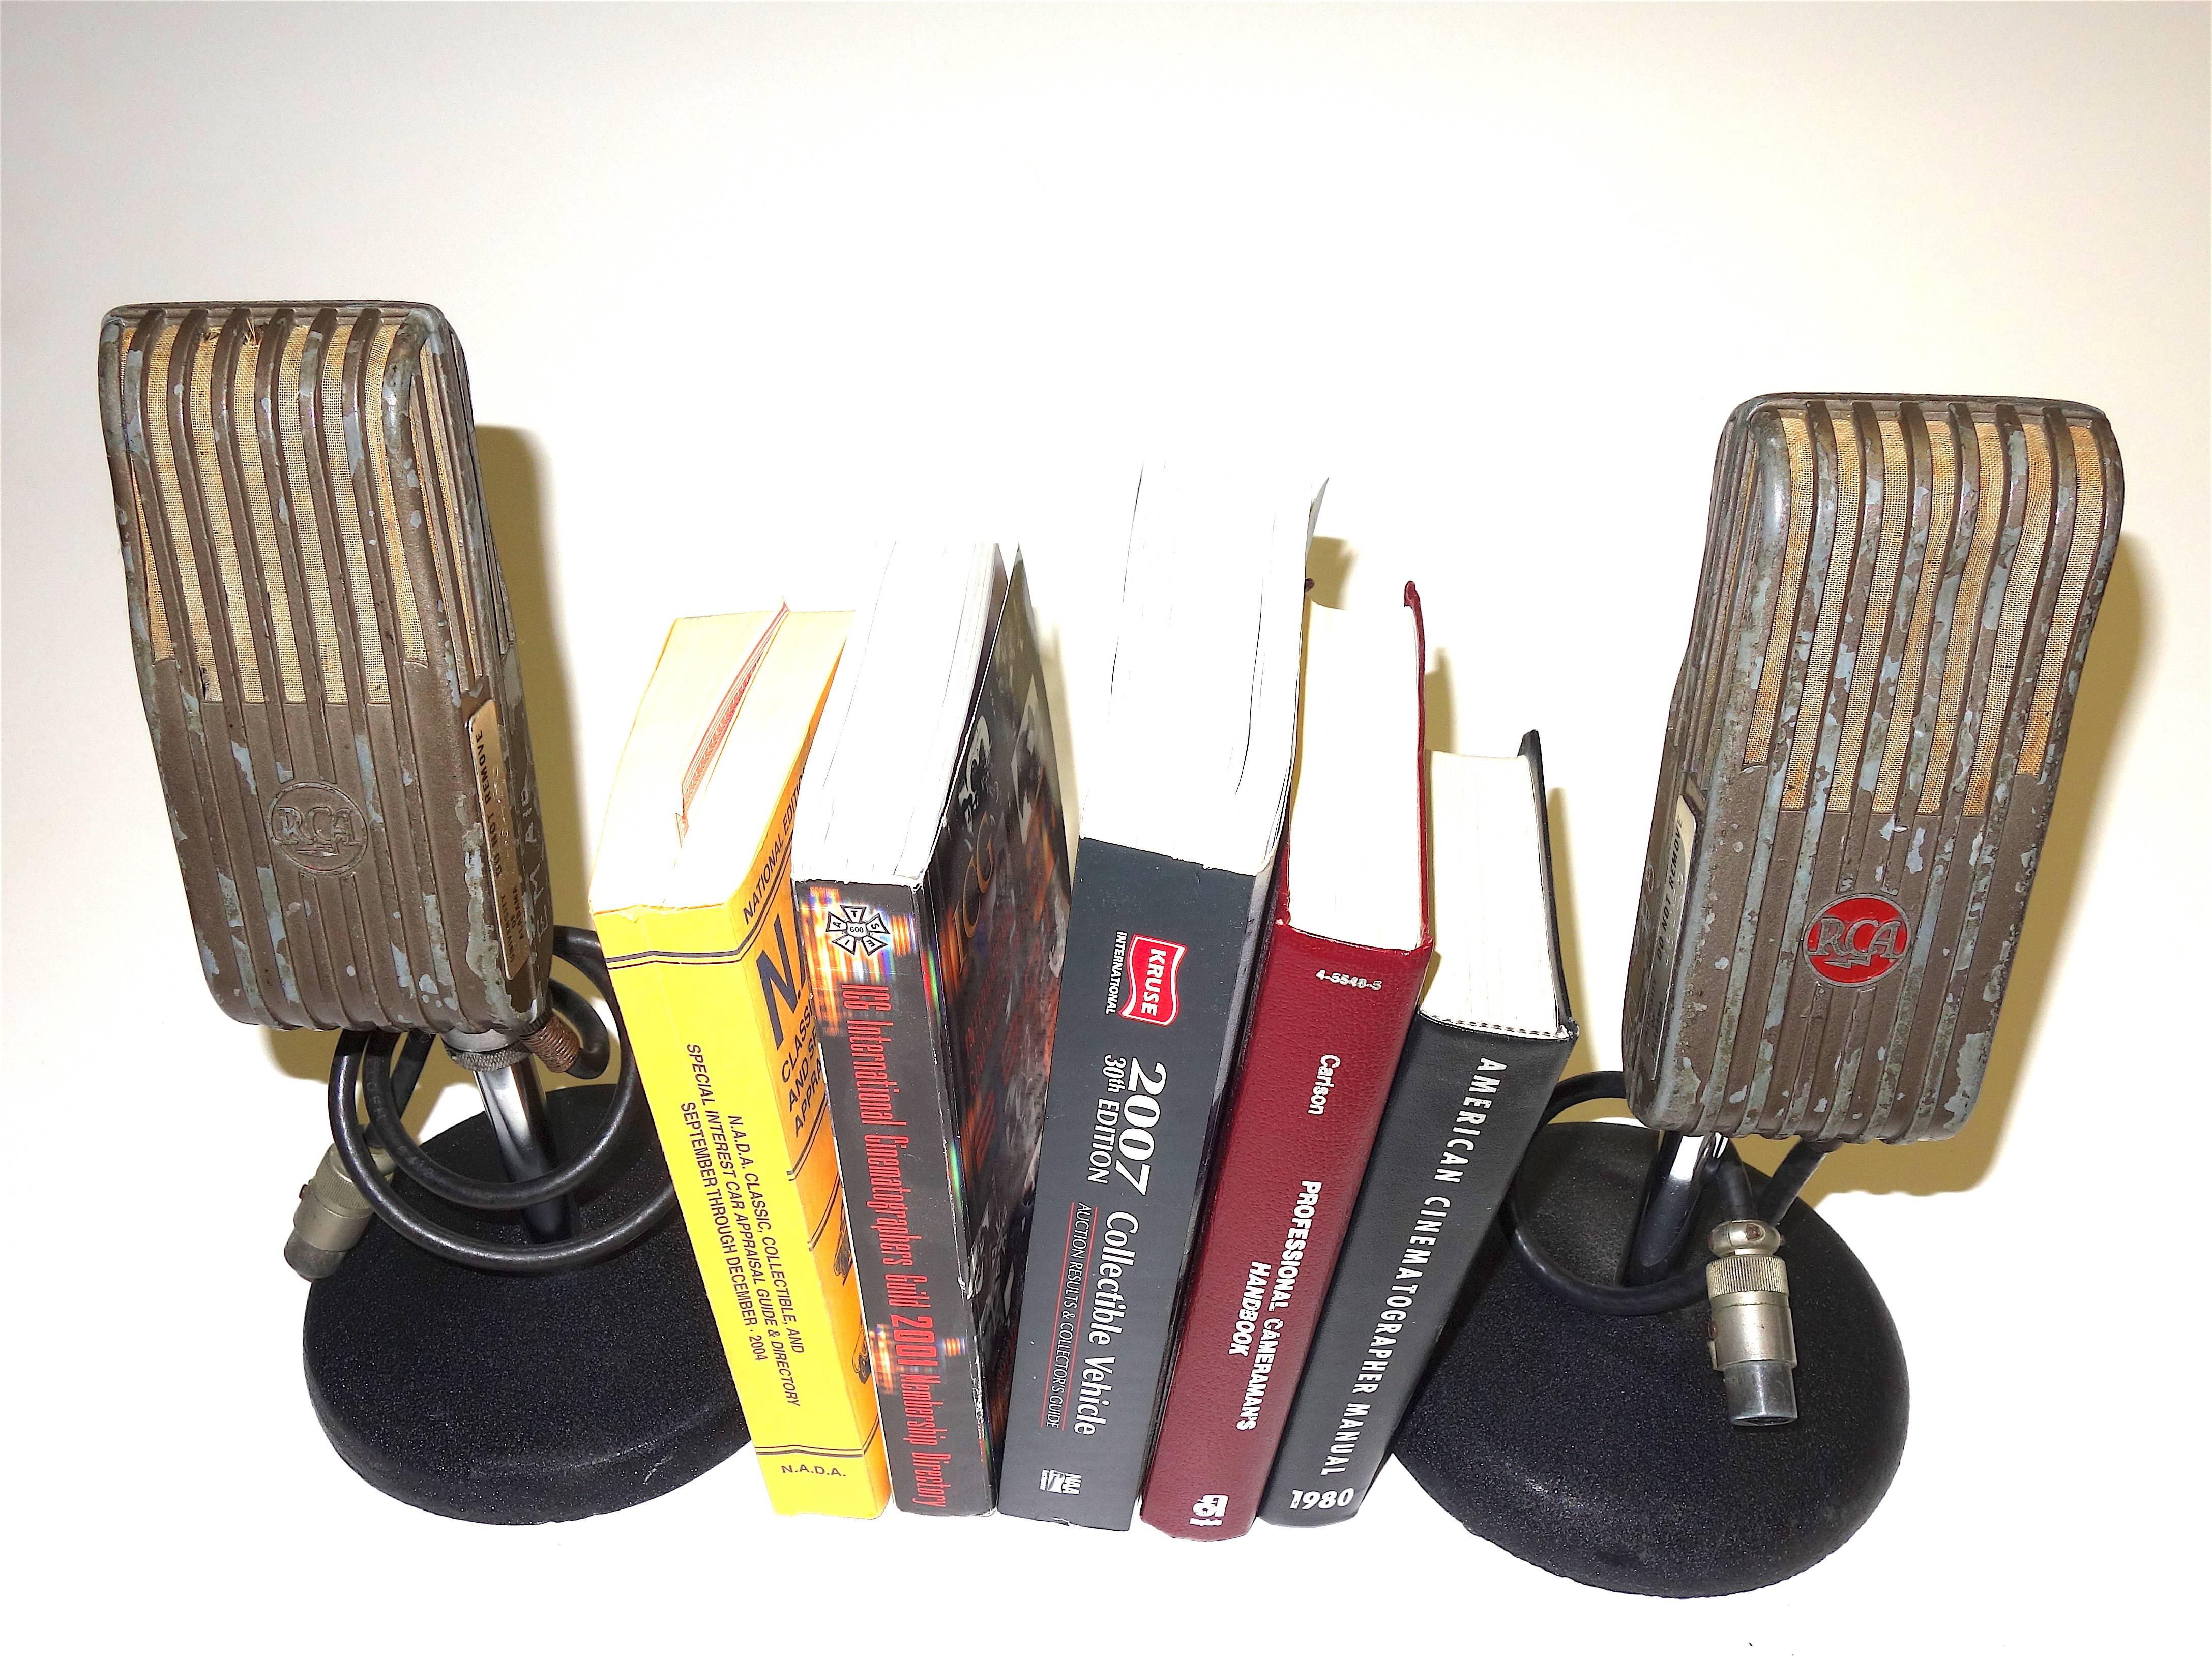 Art Deco RCA Broadcast Microphones, 1945. As Bookends or Display As Sculpture. ON SALE For Sale